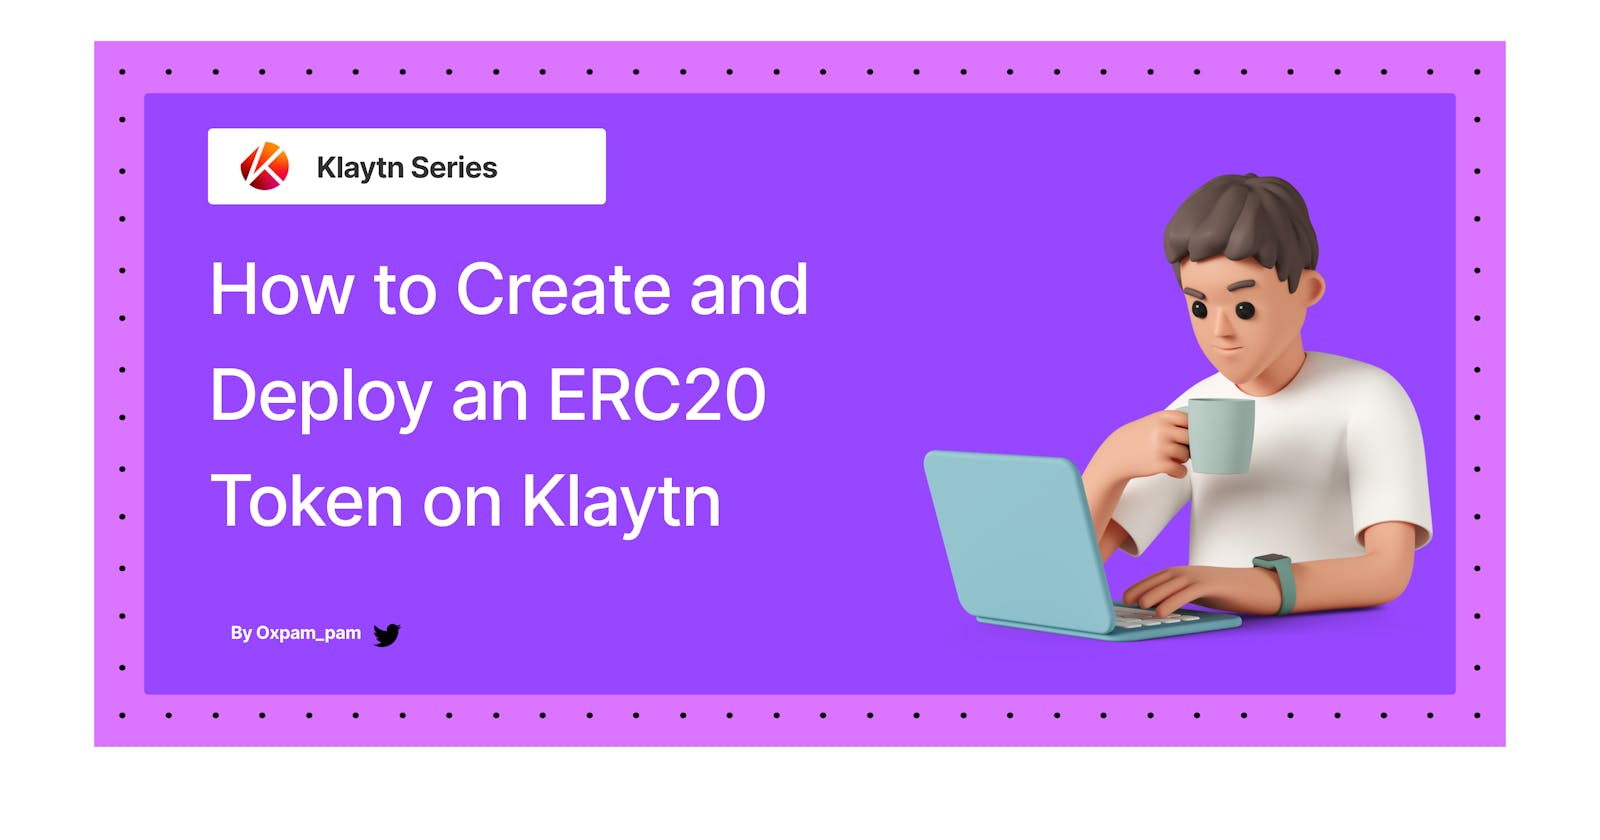 How to Create and Deploy an ERC20 Token on Klaytn